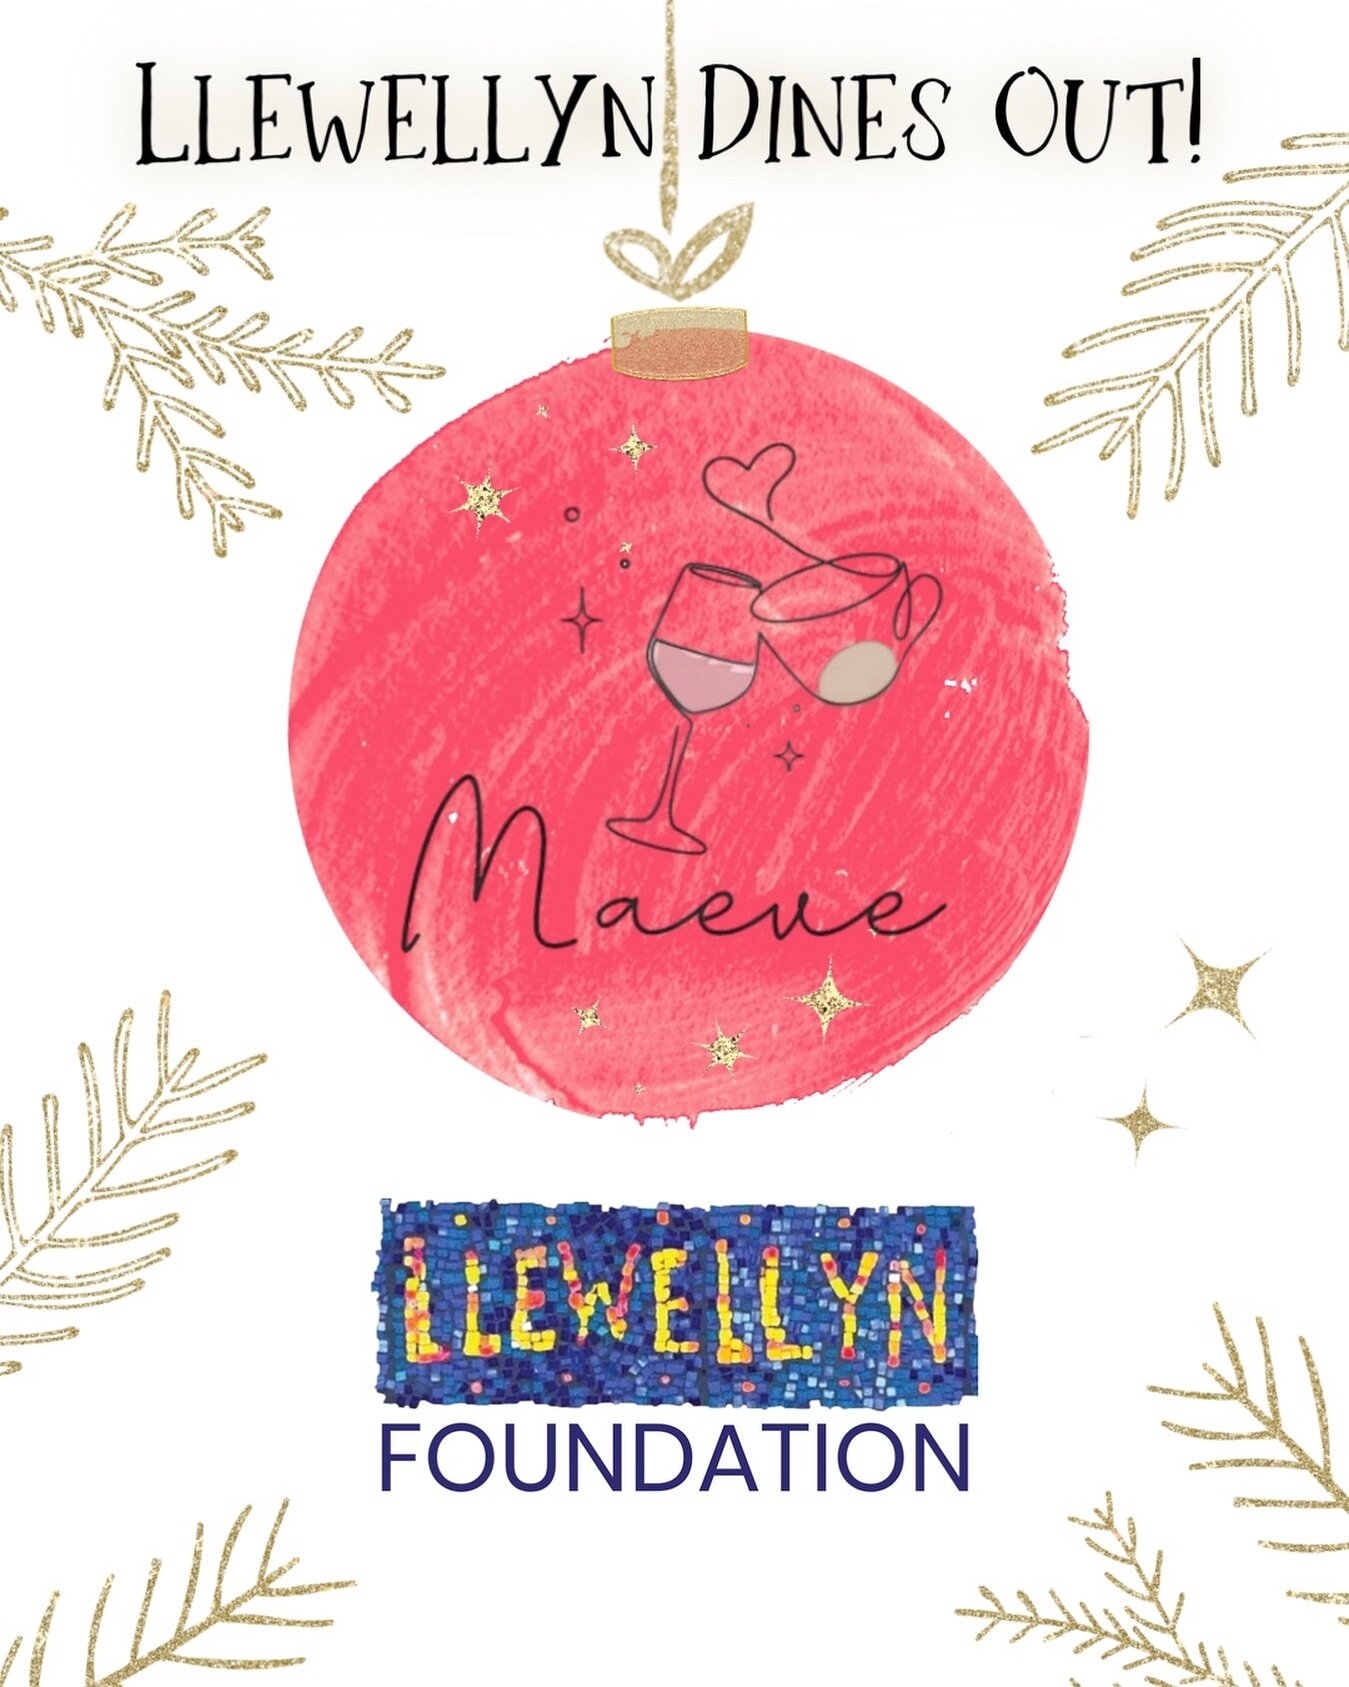 Come to MAEVE wine and coffee today!

Stock up on your holiday wine, feed the kiddos some crepes and hot cocoa, and grab yourself a latte or glass of wine!
20% of day's proceeds will be donated to your Llewellyn Foundation.

10am-8pm. See you there!